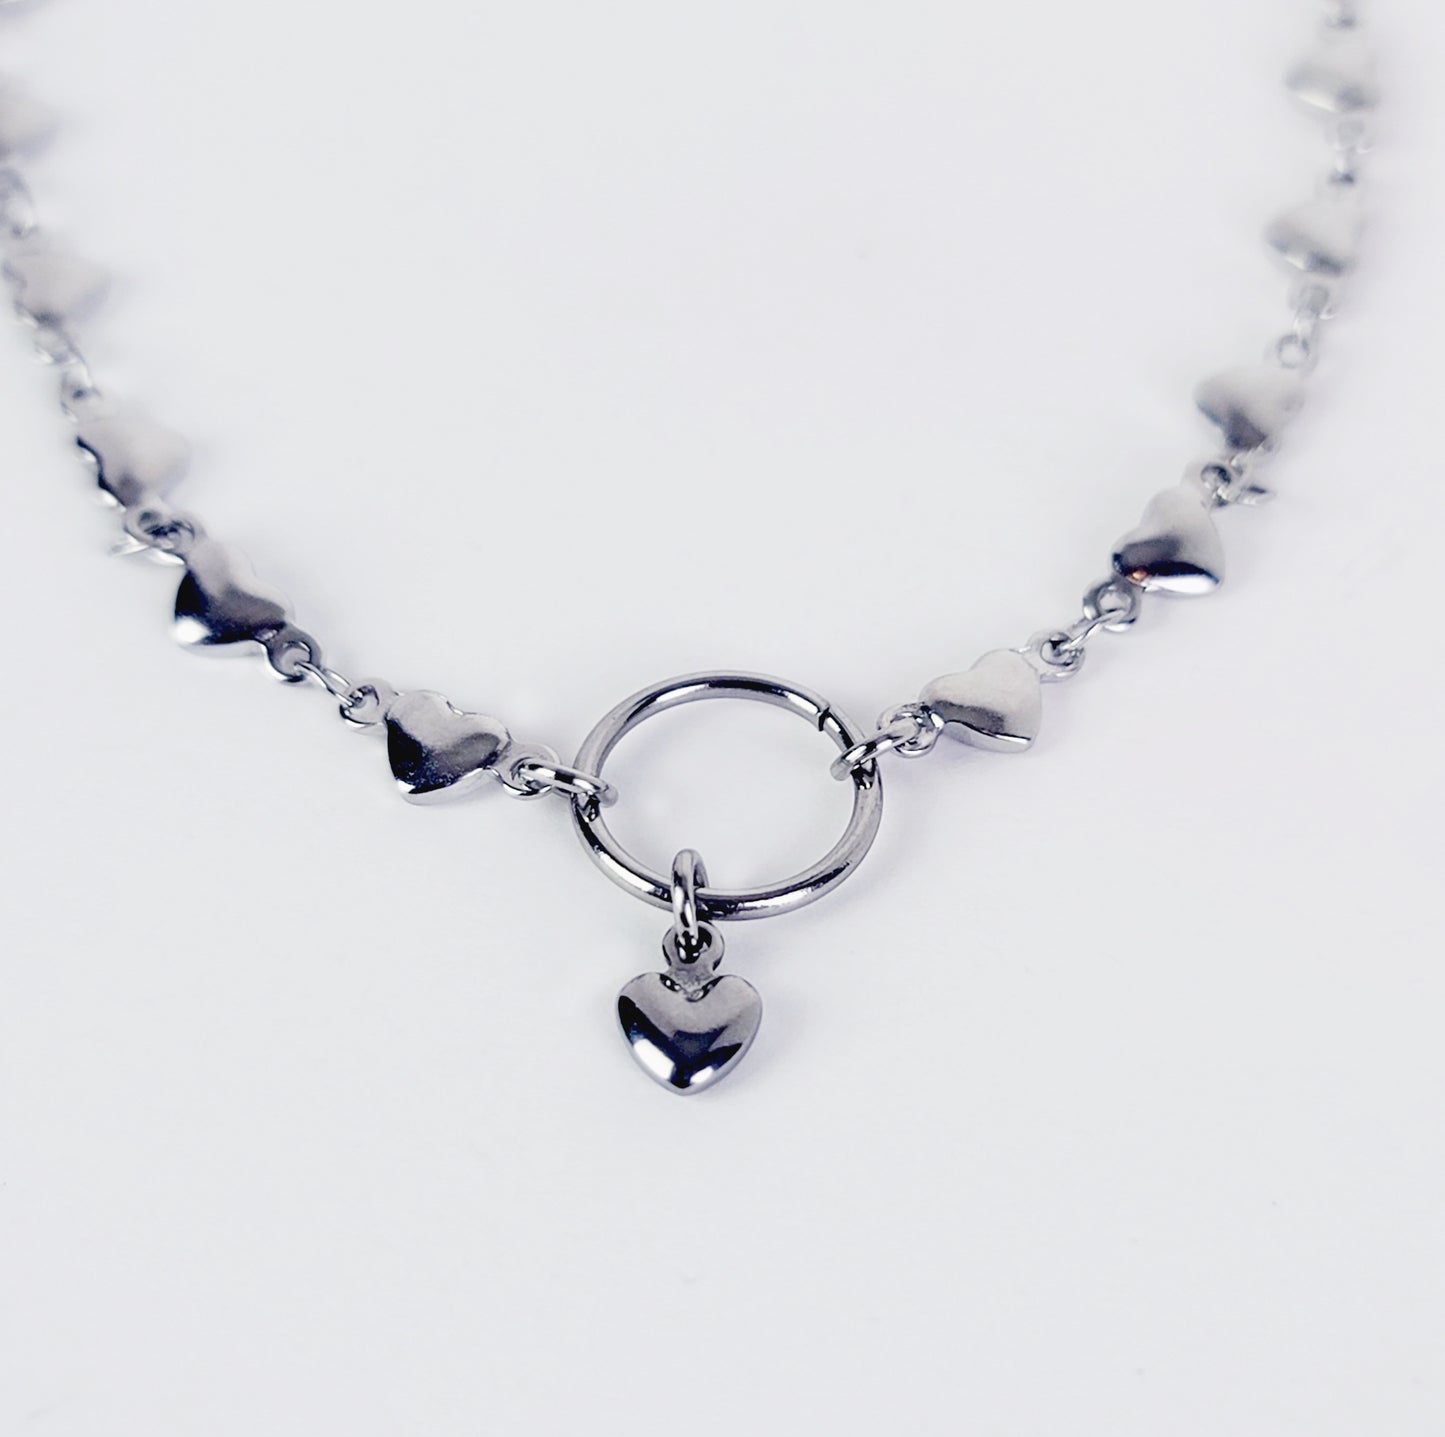 Circle of O Discreet Day Collar Anklet for BDSM Submissive, Stainless Steel Heart Chain. 100% Stainless Steel